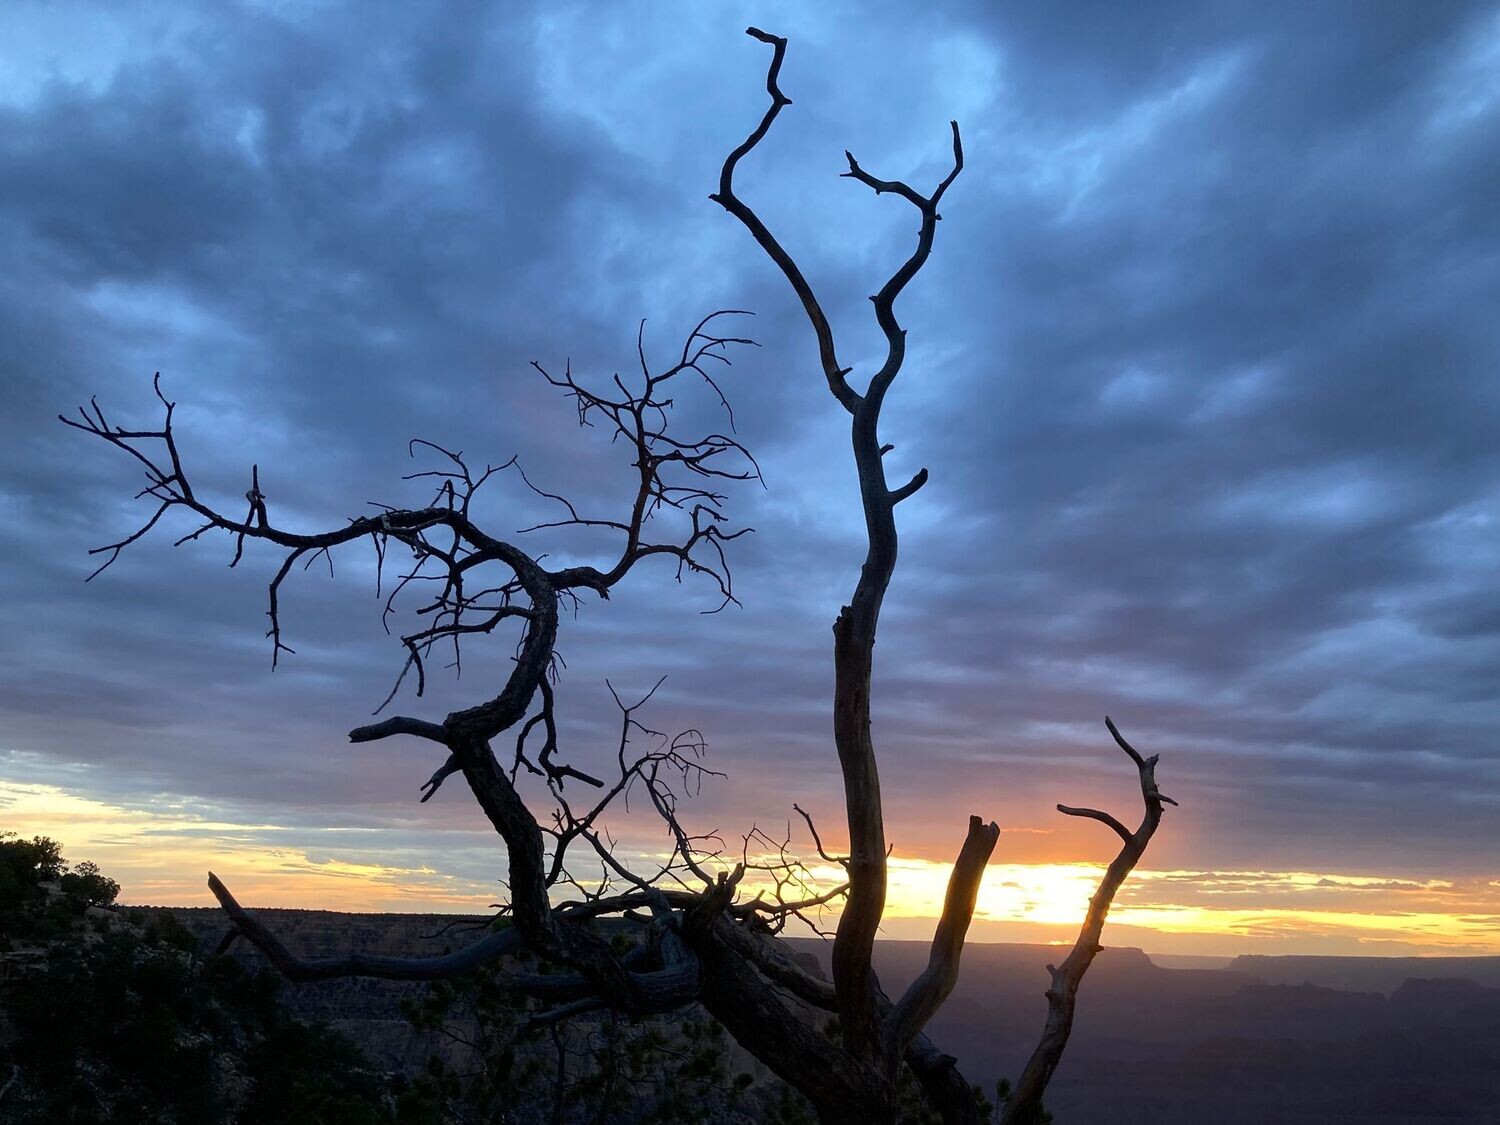 "Grand Canyon Silhouette" by Spencer Evans